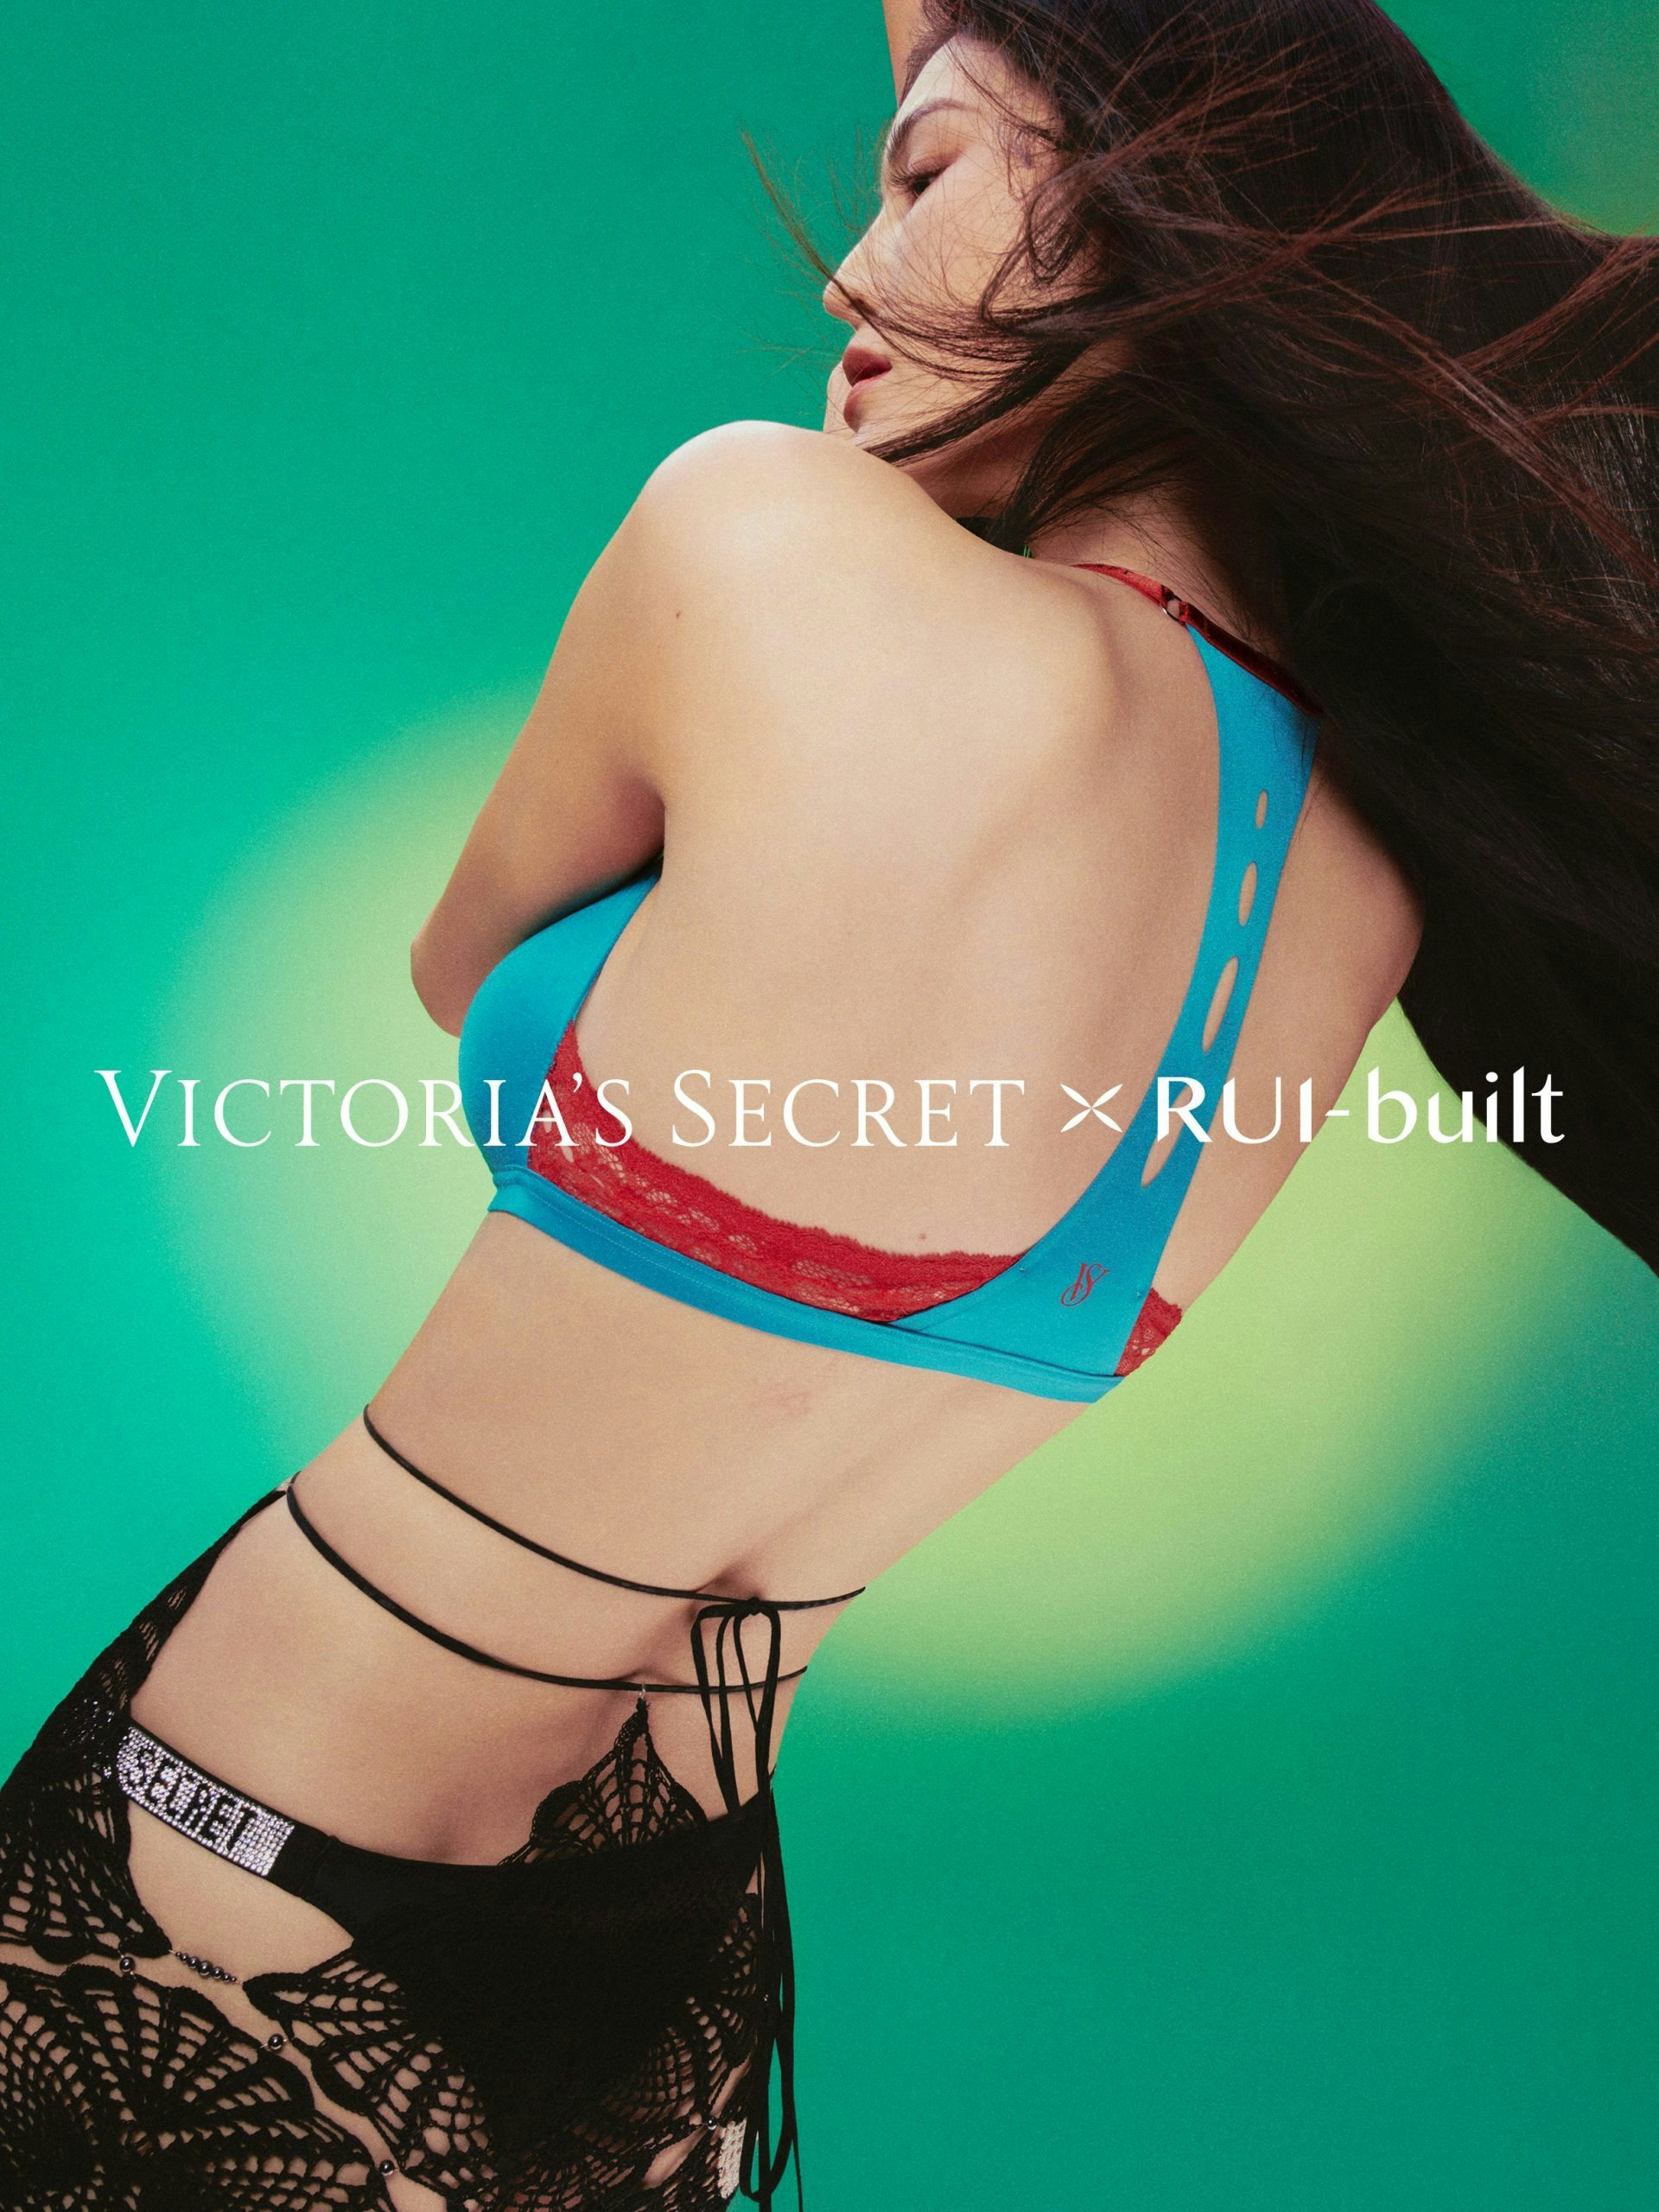 French lingerie show says knickers to Victoria's Secret